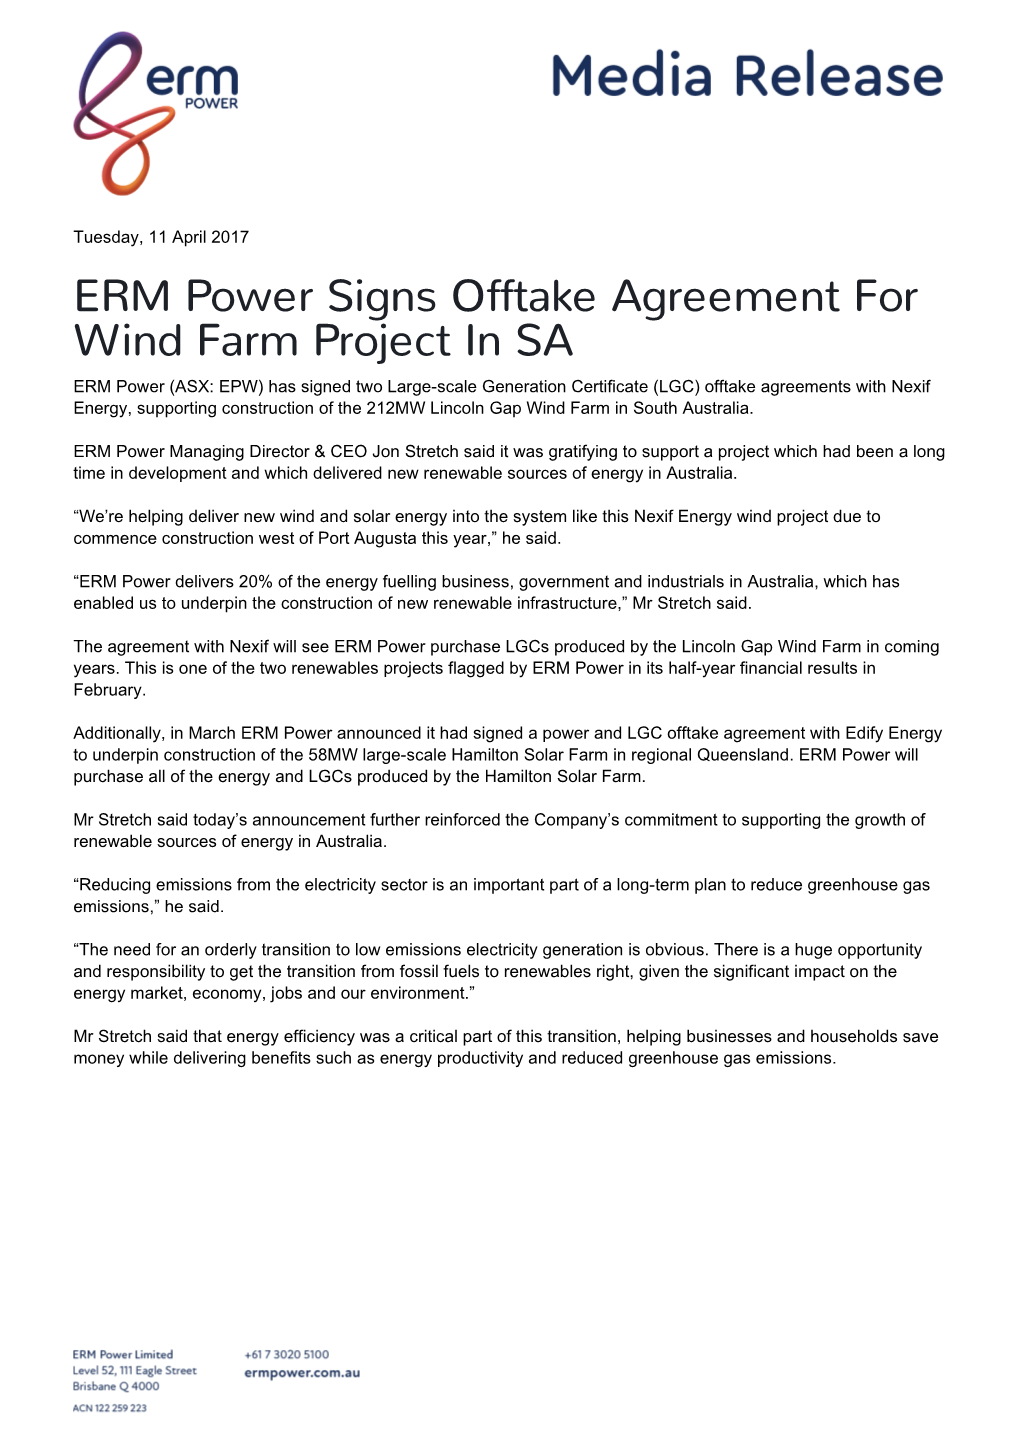 ERM Power Signs Offtake Agreement for Wind Farm Project in SA